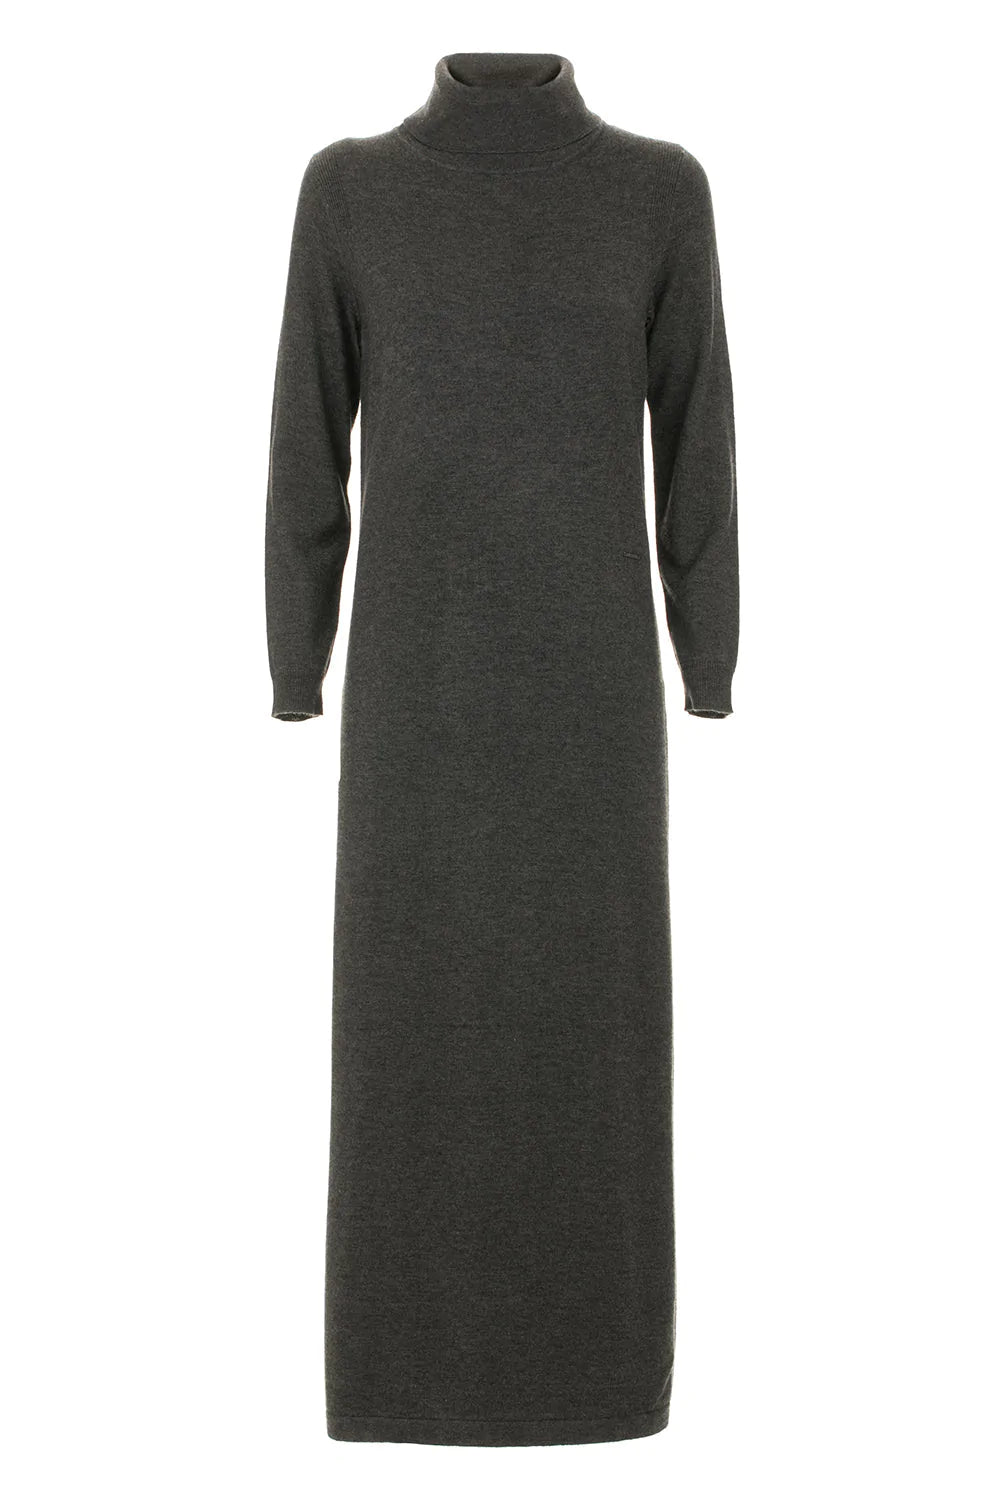 Imperfect high collar  Dress Dresses - Women - Clothing, feed-agegroup-adult, feed-color-Gray, feed-gender-female, Gray, Imperfect, L, M, S, XL, XS at SEYMAYKA